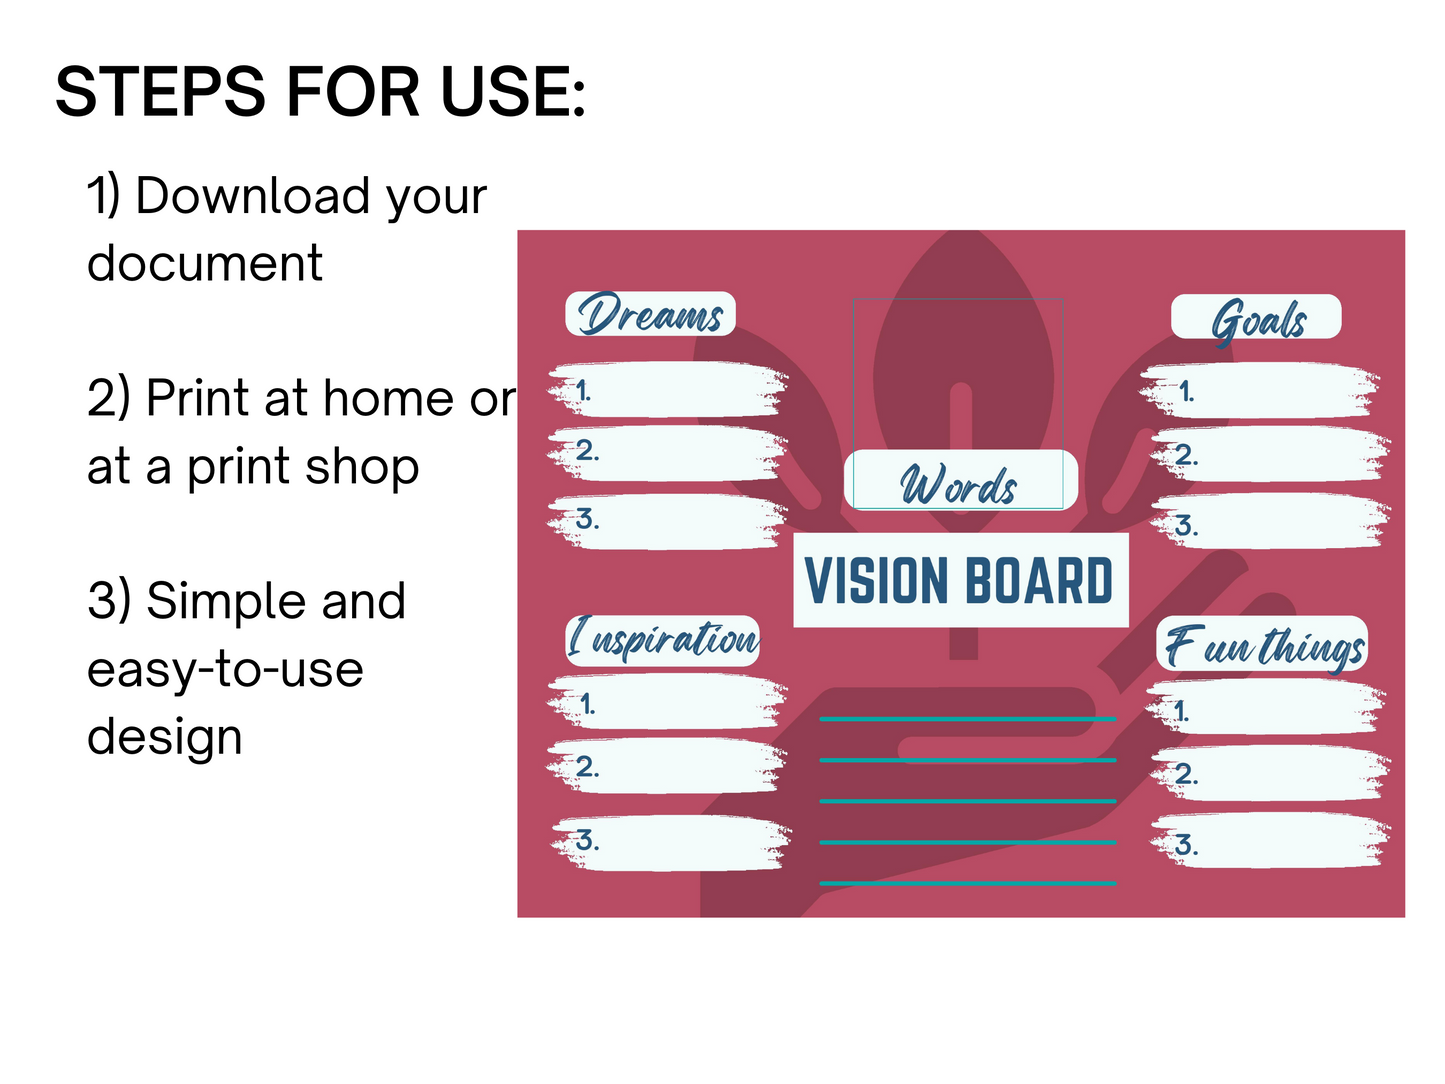 3 simples steps for using the vision board printabe.